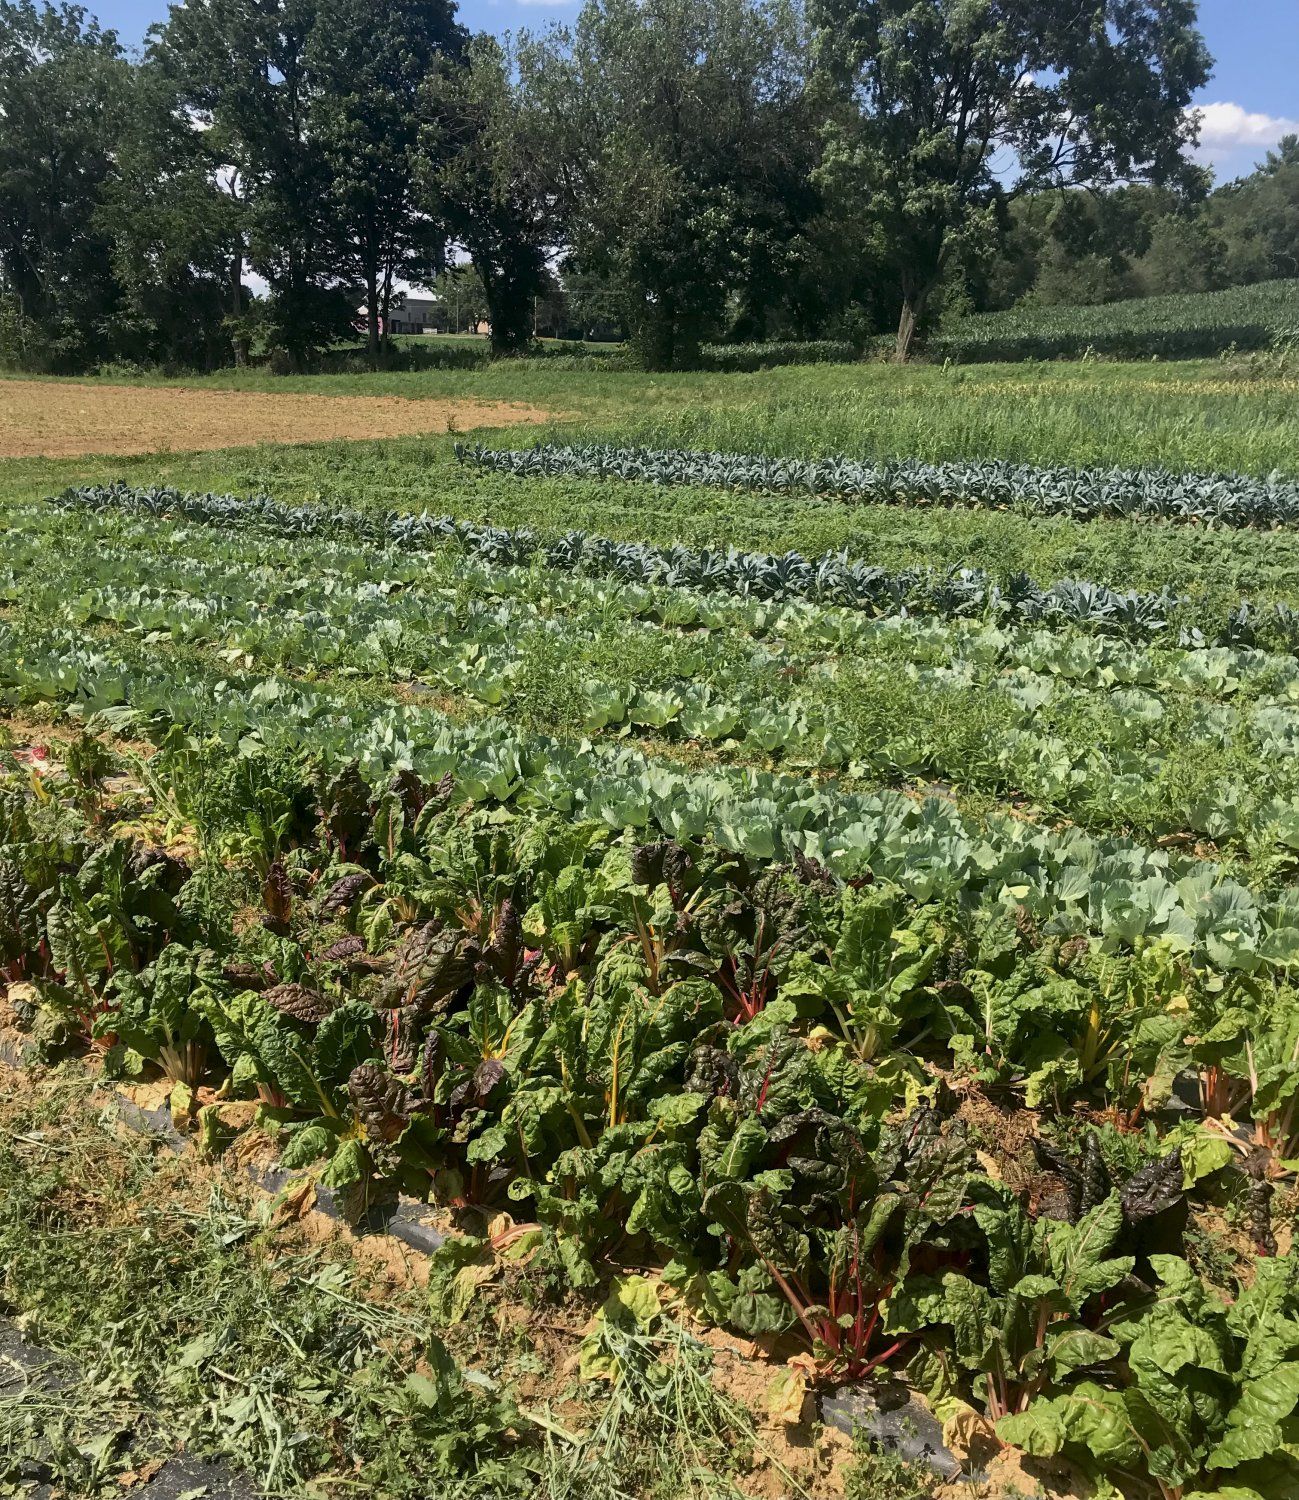 Previous Happening: Farm Happenings for July 9, 2021